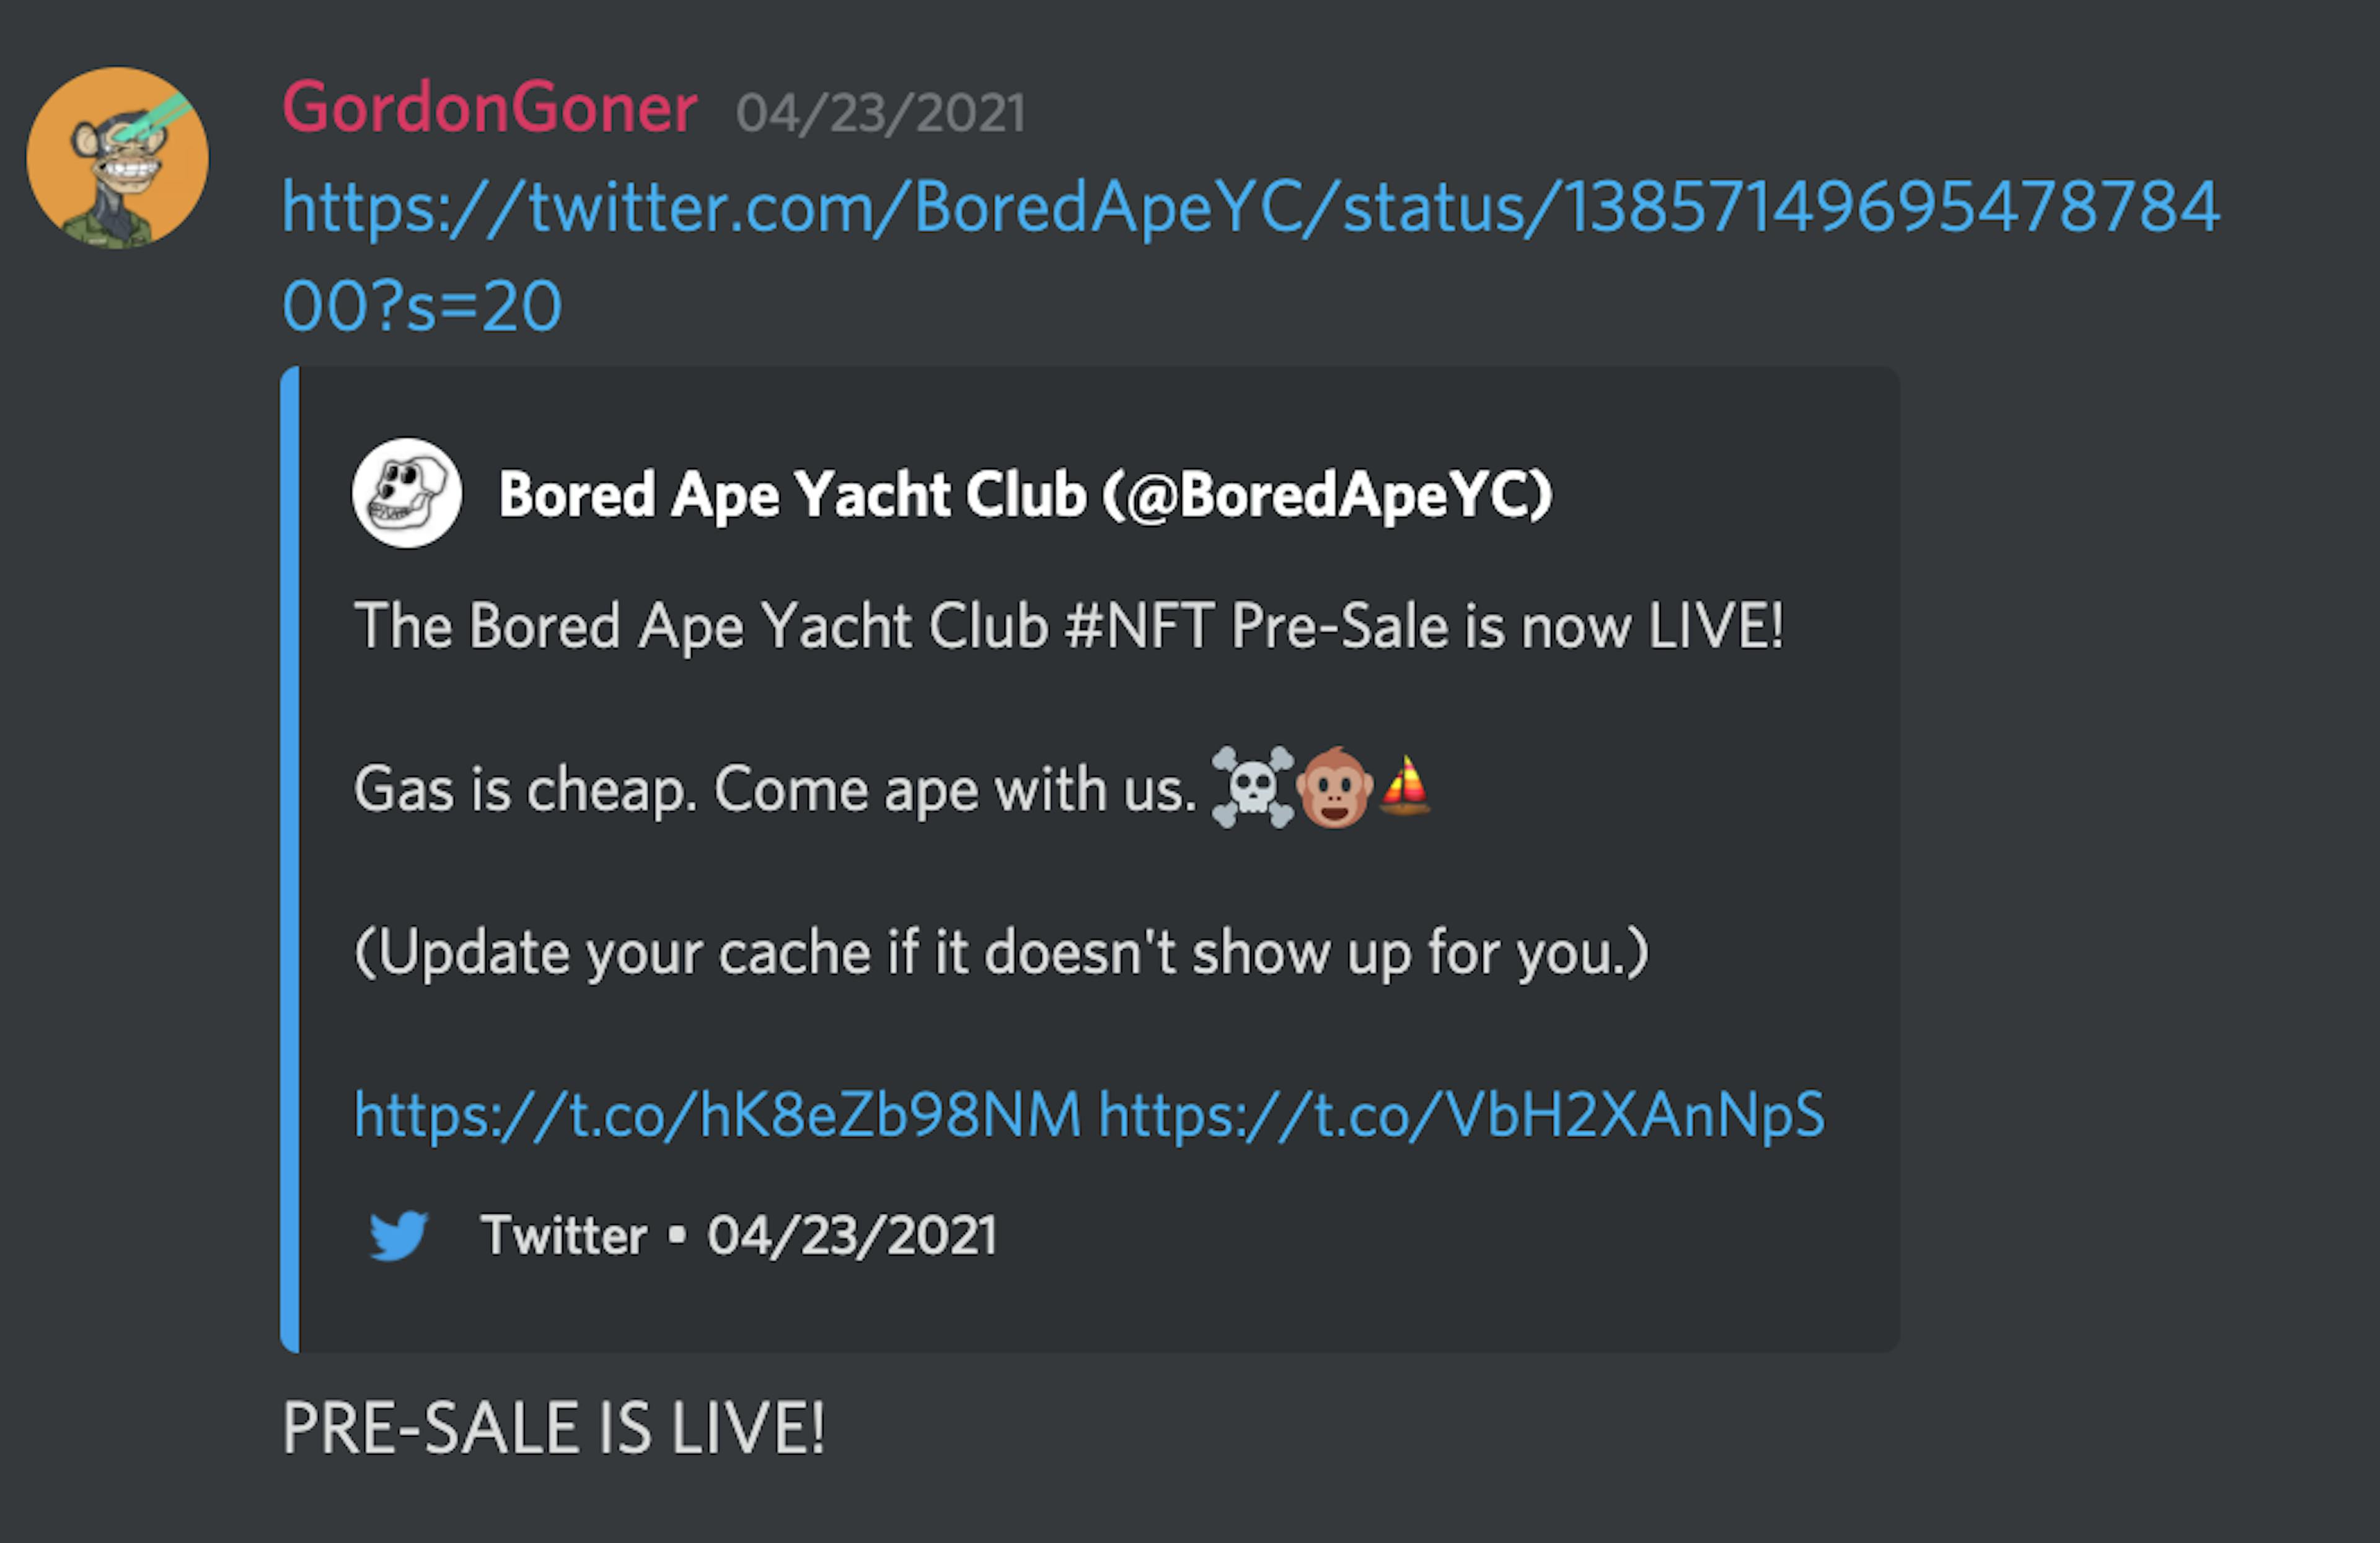 Gordon Goner, one of the founders of Bored Ape Yacht Club announcing the Pre-Sale